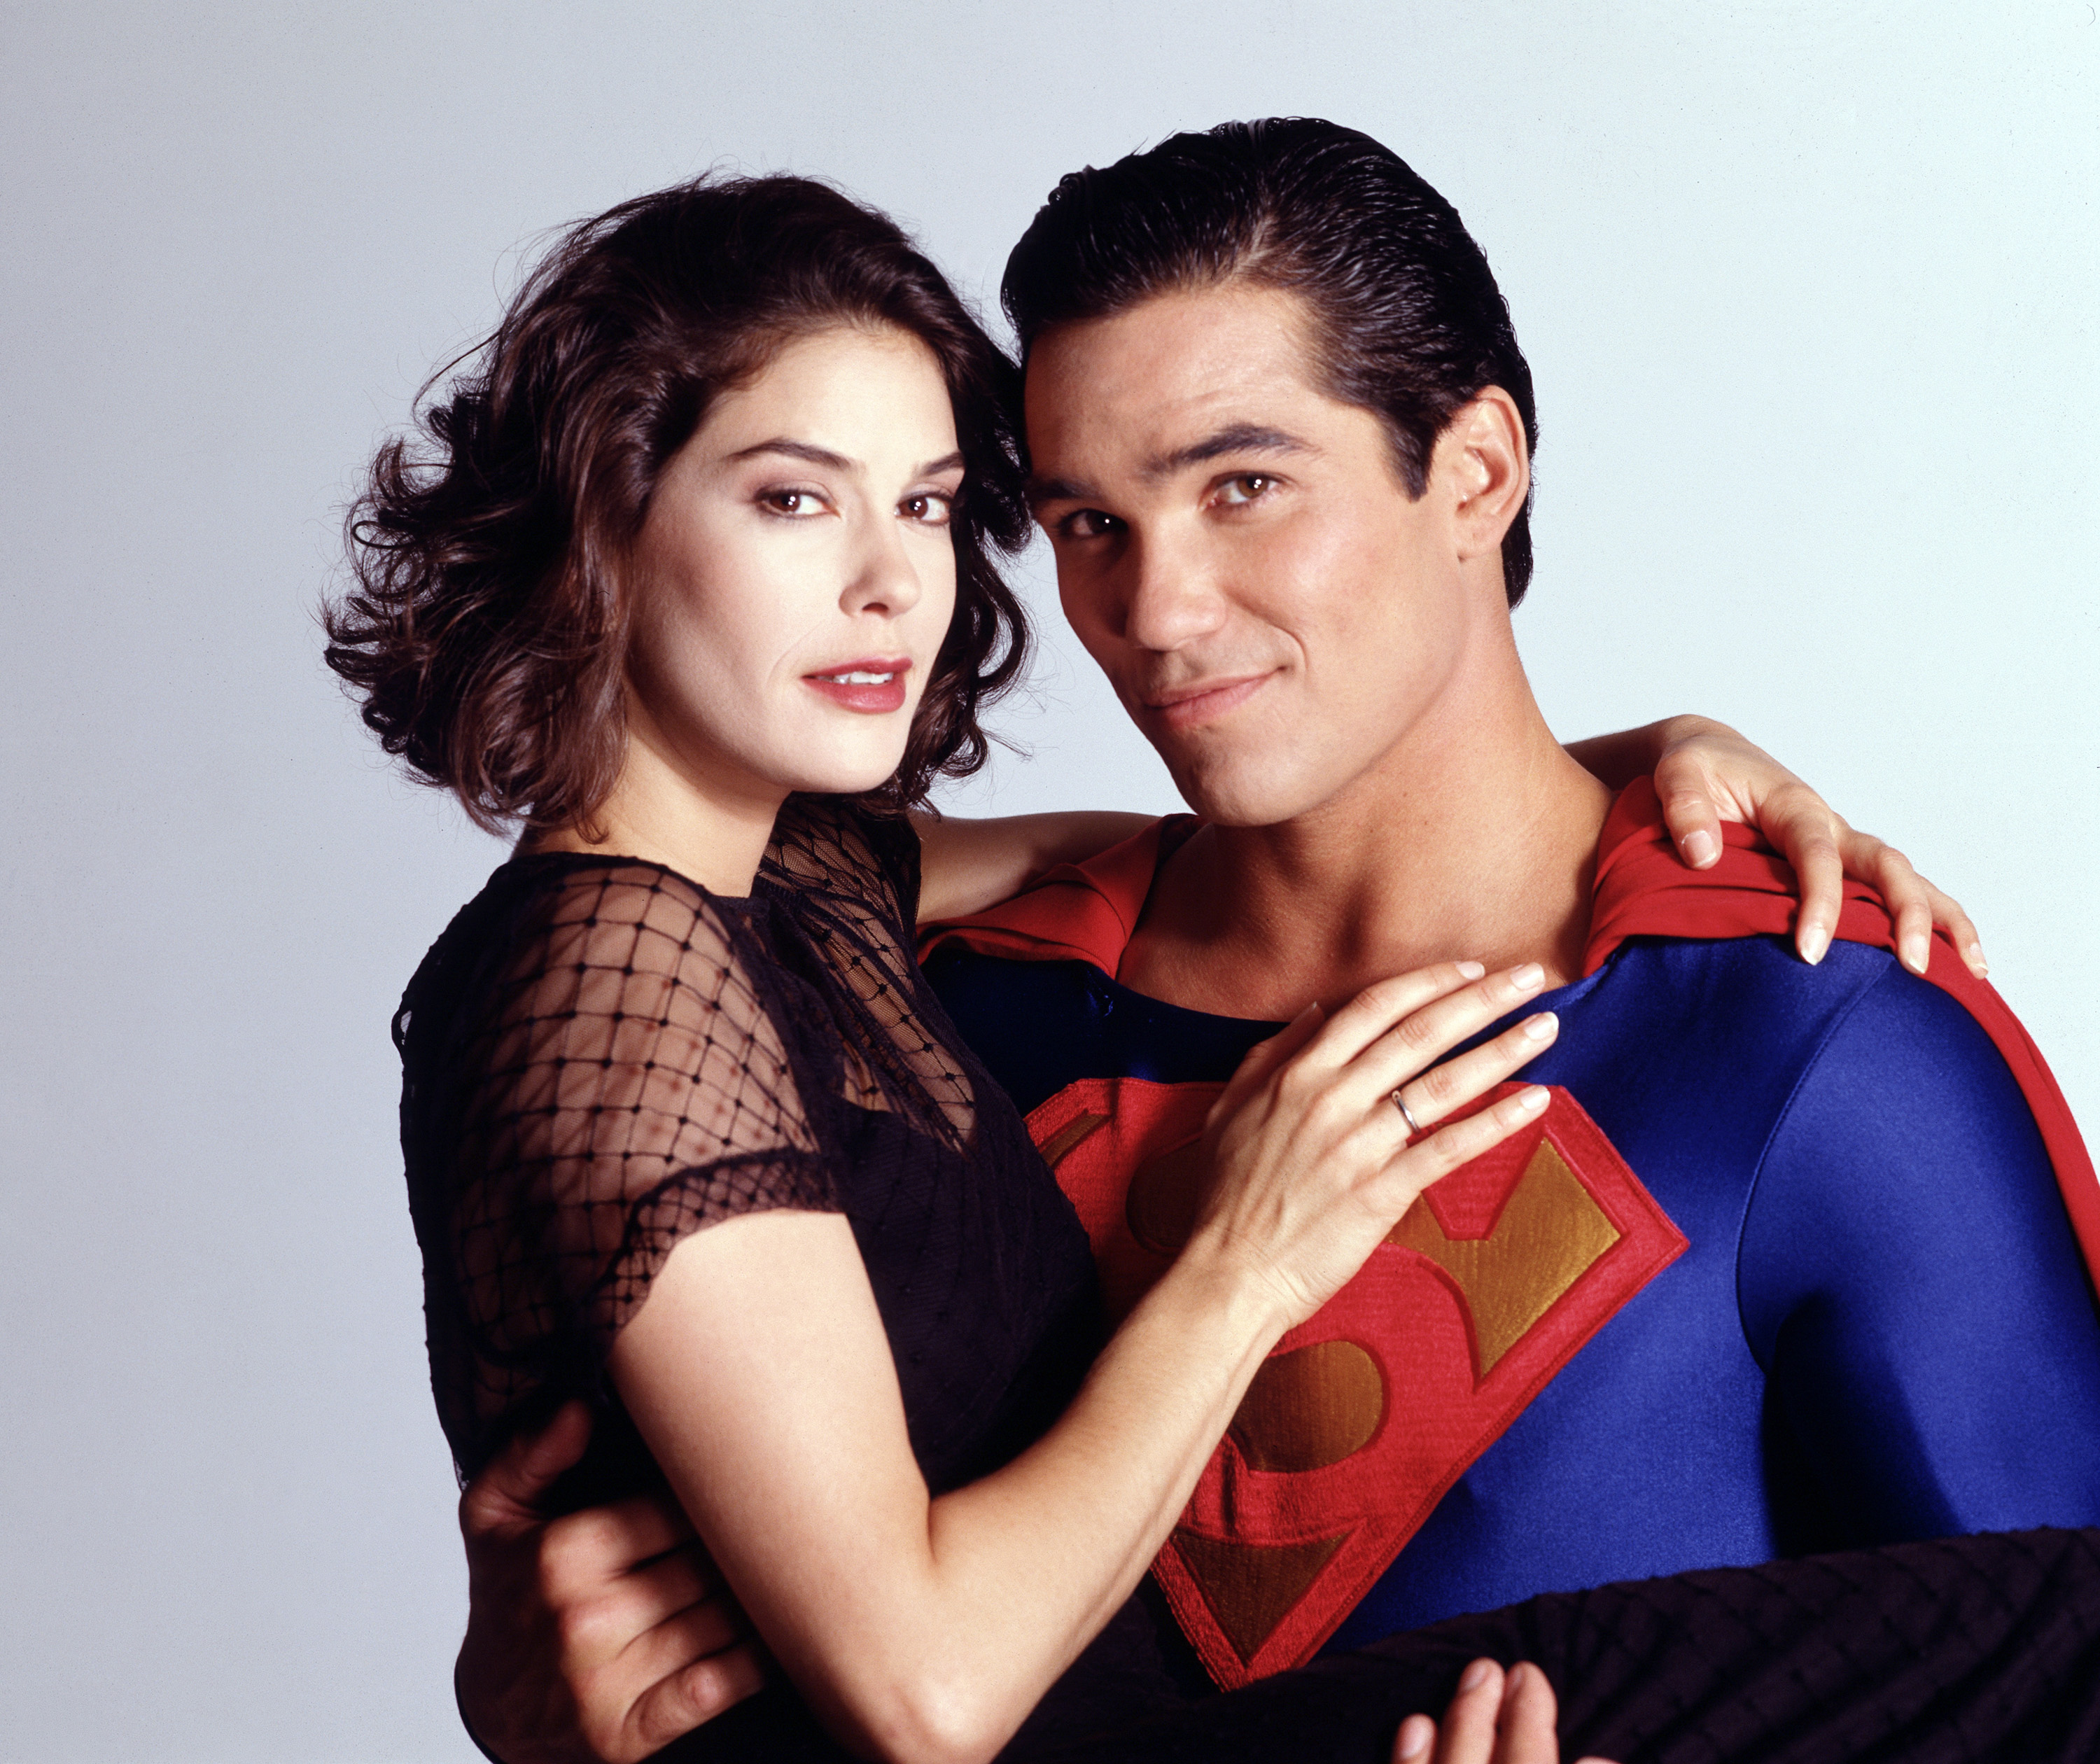 Teri Hatcher and Dean Cain on "Lois and Clark: The New Adventures of Superman" on August 16, 1994. | Source: Getty Images